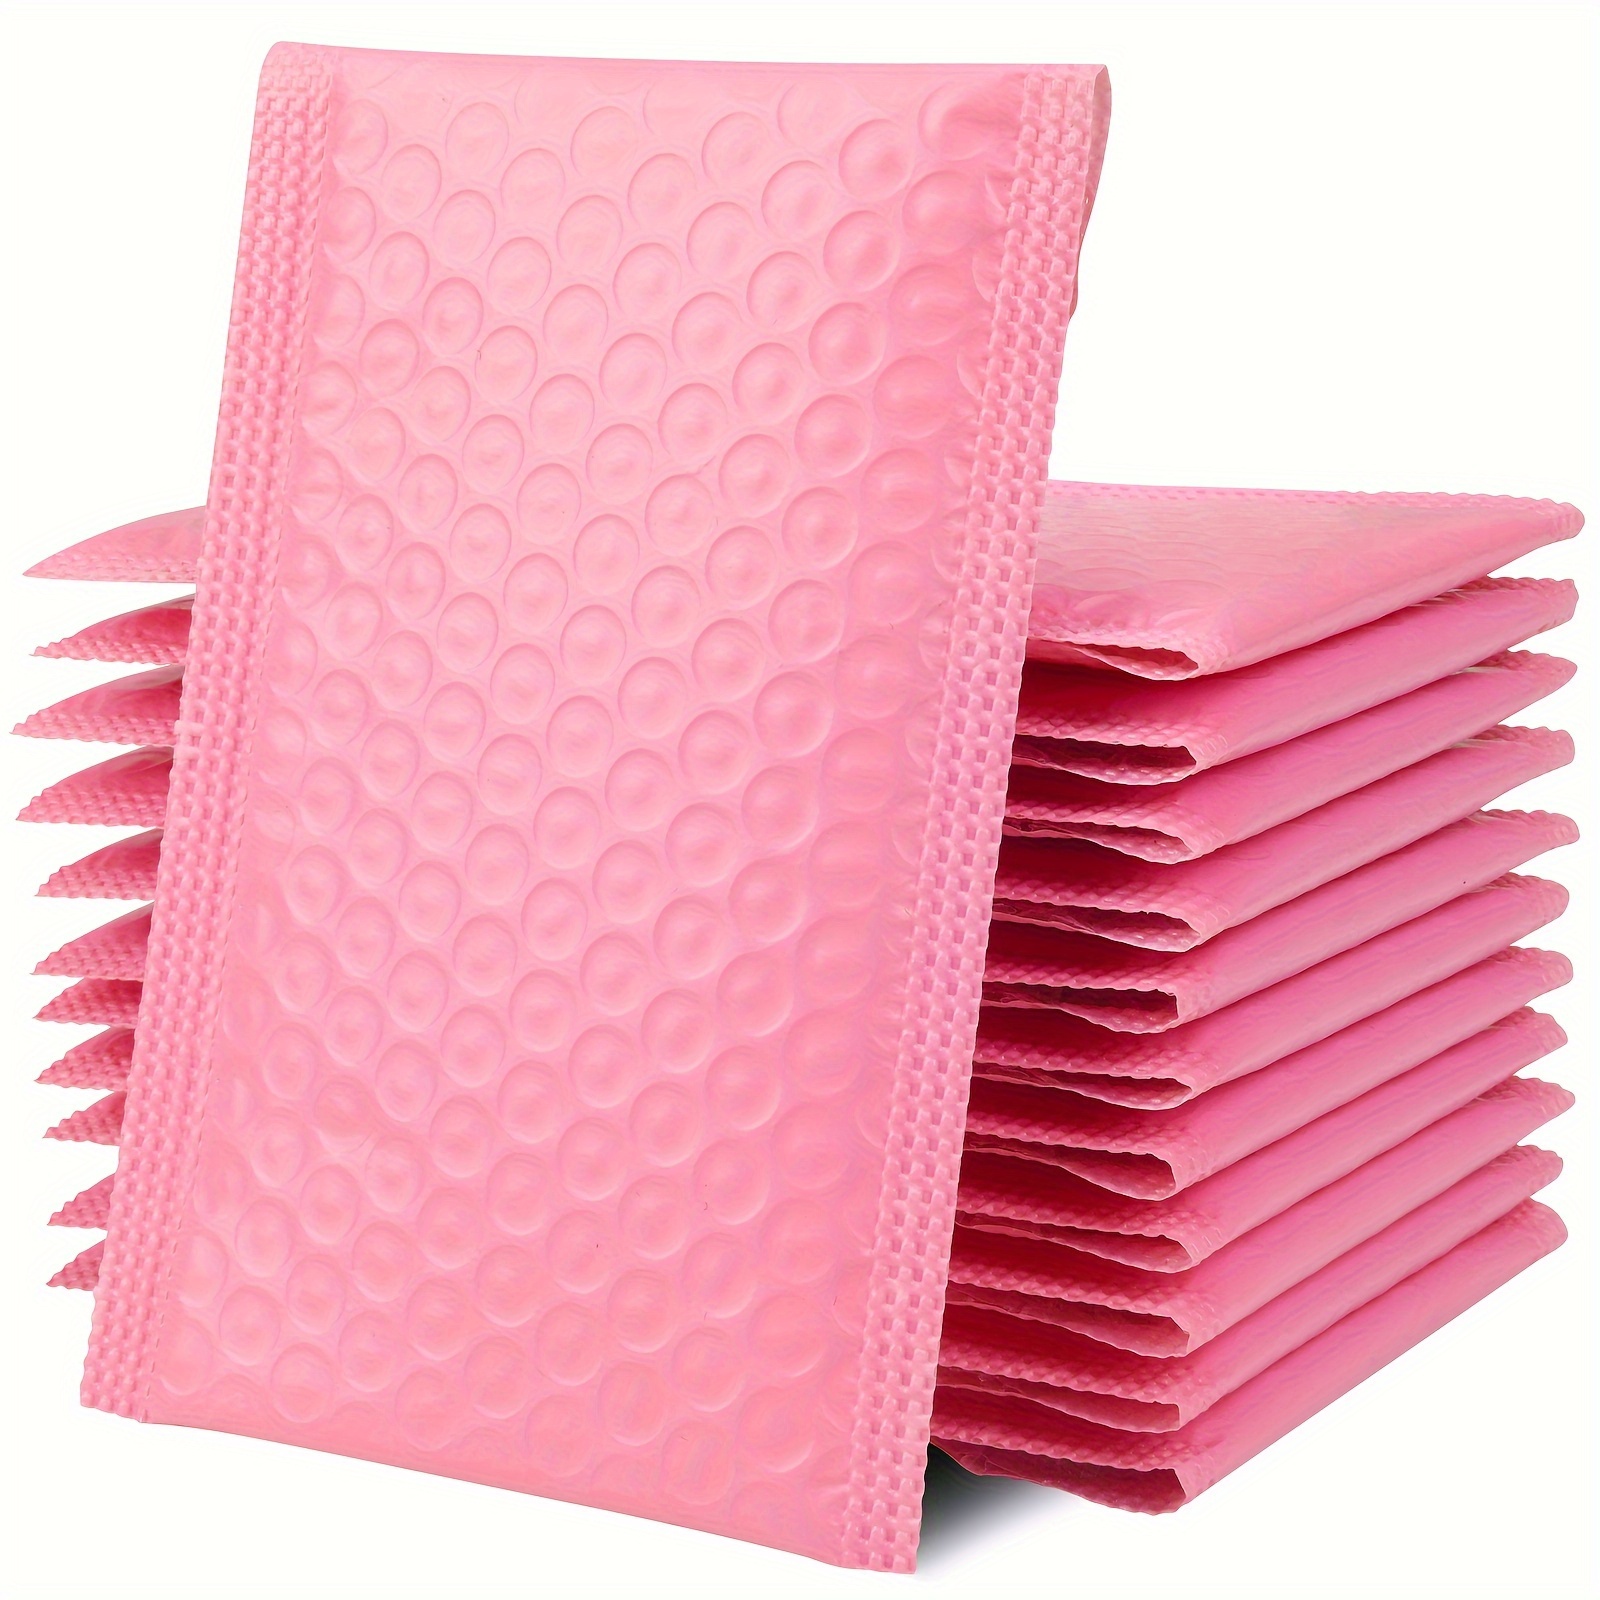 

30pcs Mailers 4x8 Inch Light Poly Padded Envelopes Small Business Mailing Packages Opaque Self Seal Adhesive Waterproof Boutique Shipping Bags For Jewelry Makeup Supplies